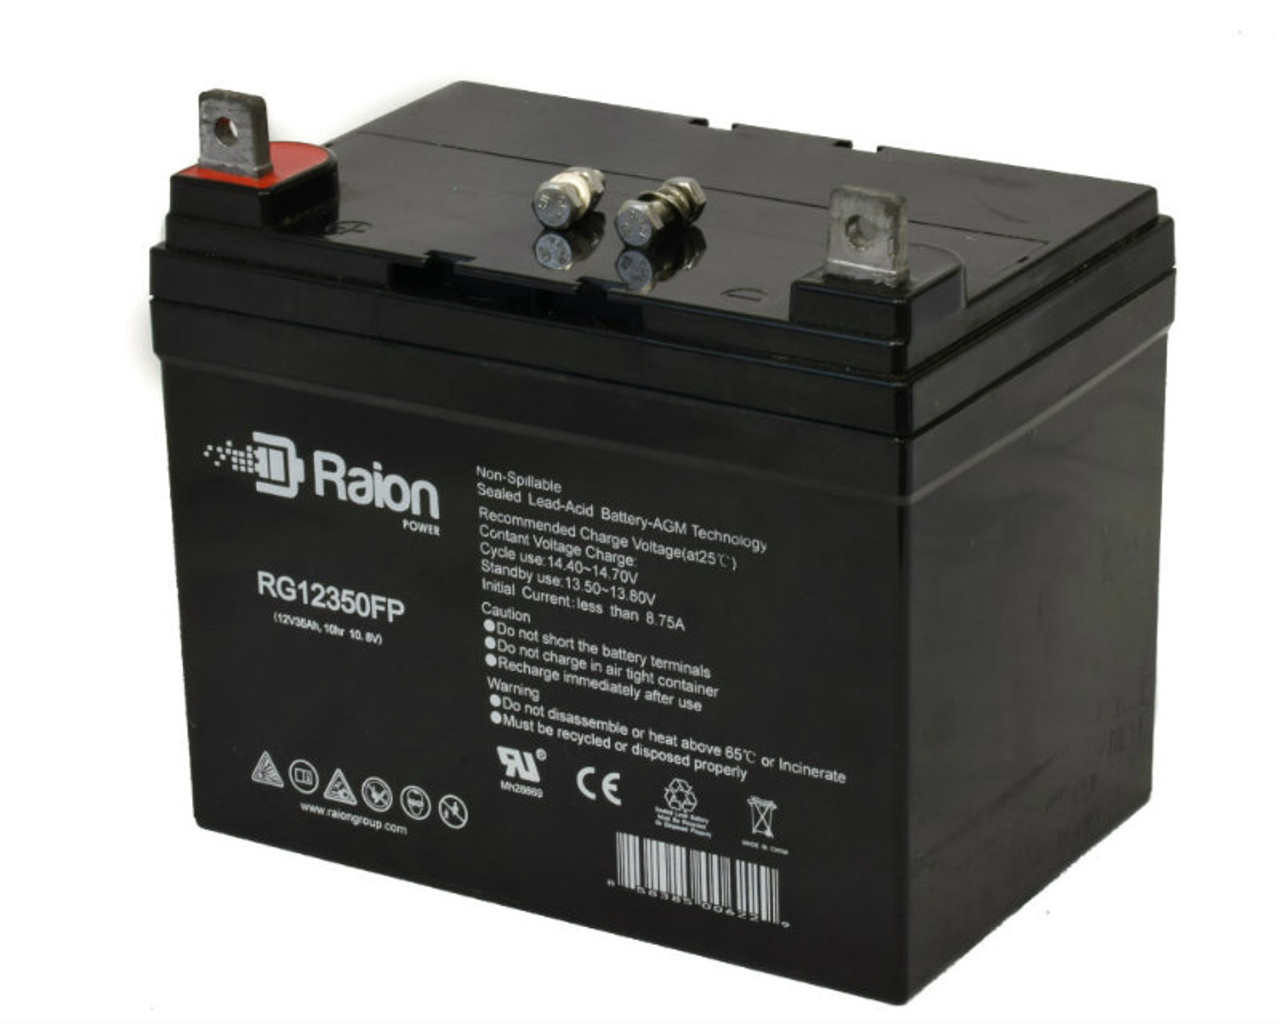 Raion Power Replacement 12V 35Ah RG12350FP Battery for Ingersol Equipment 5018CD